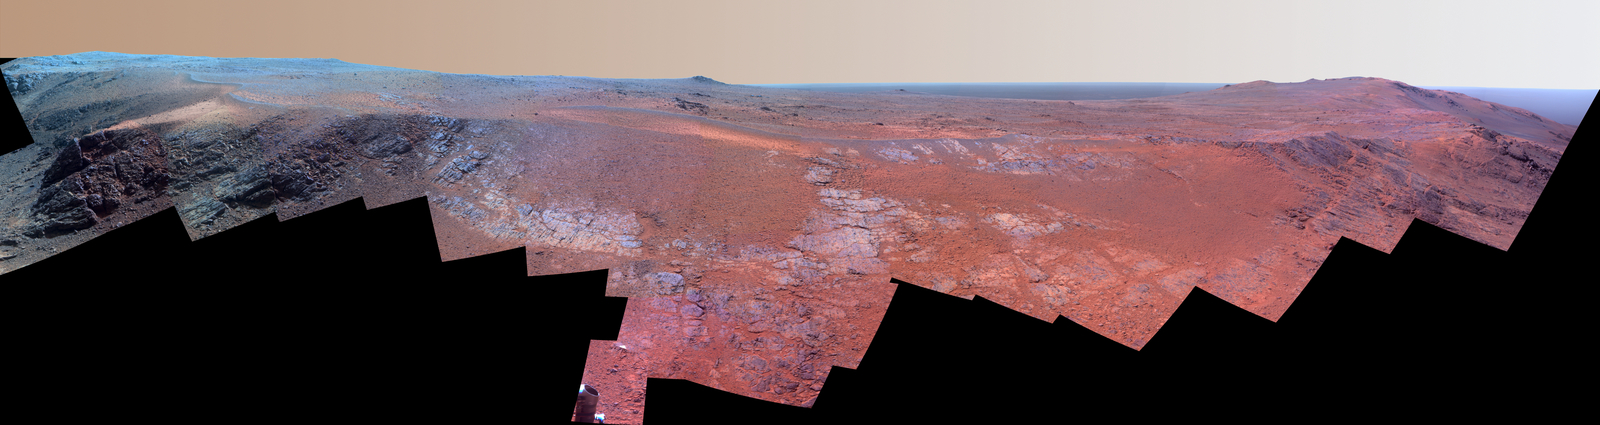 A grooved ridge called "Rocheport" on the rim of Mars' Endeavour Crater spans this scene from the Pancam on NASA's Mars rover Opportunity. This version of the scene is presented in enhanced color to make differences in surface materials more easily visible.